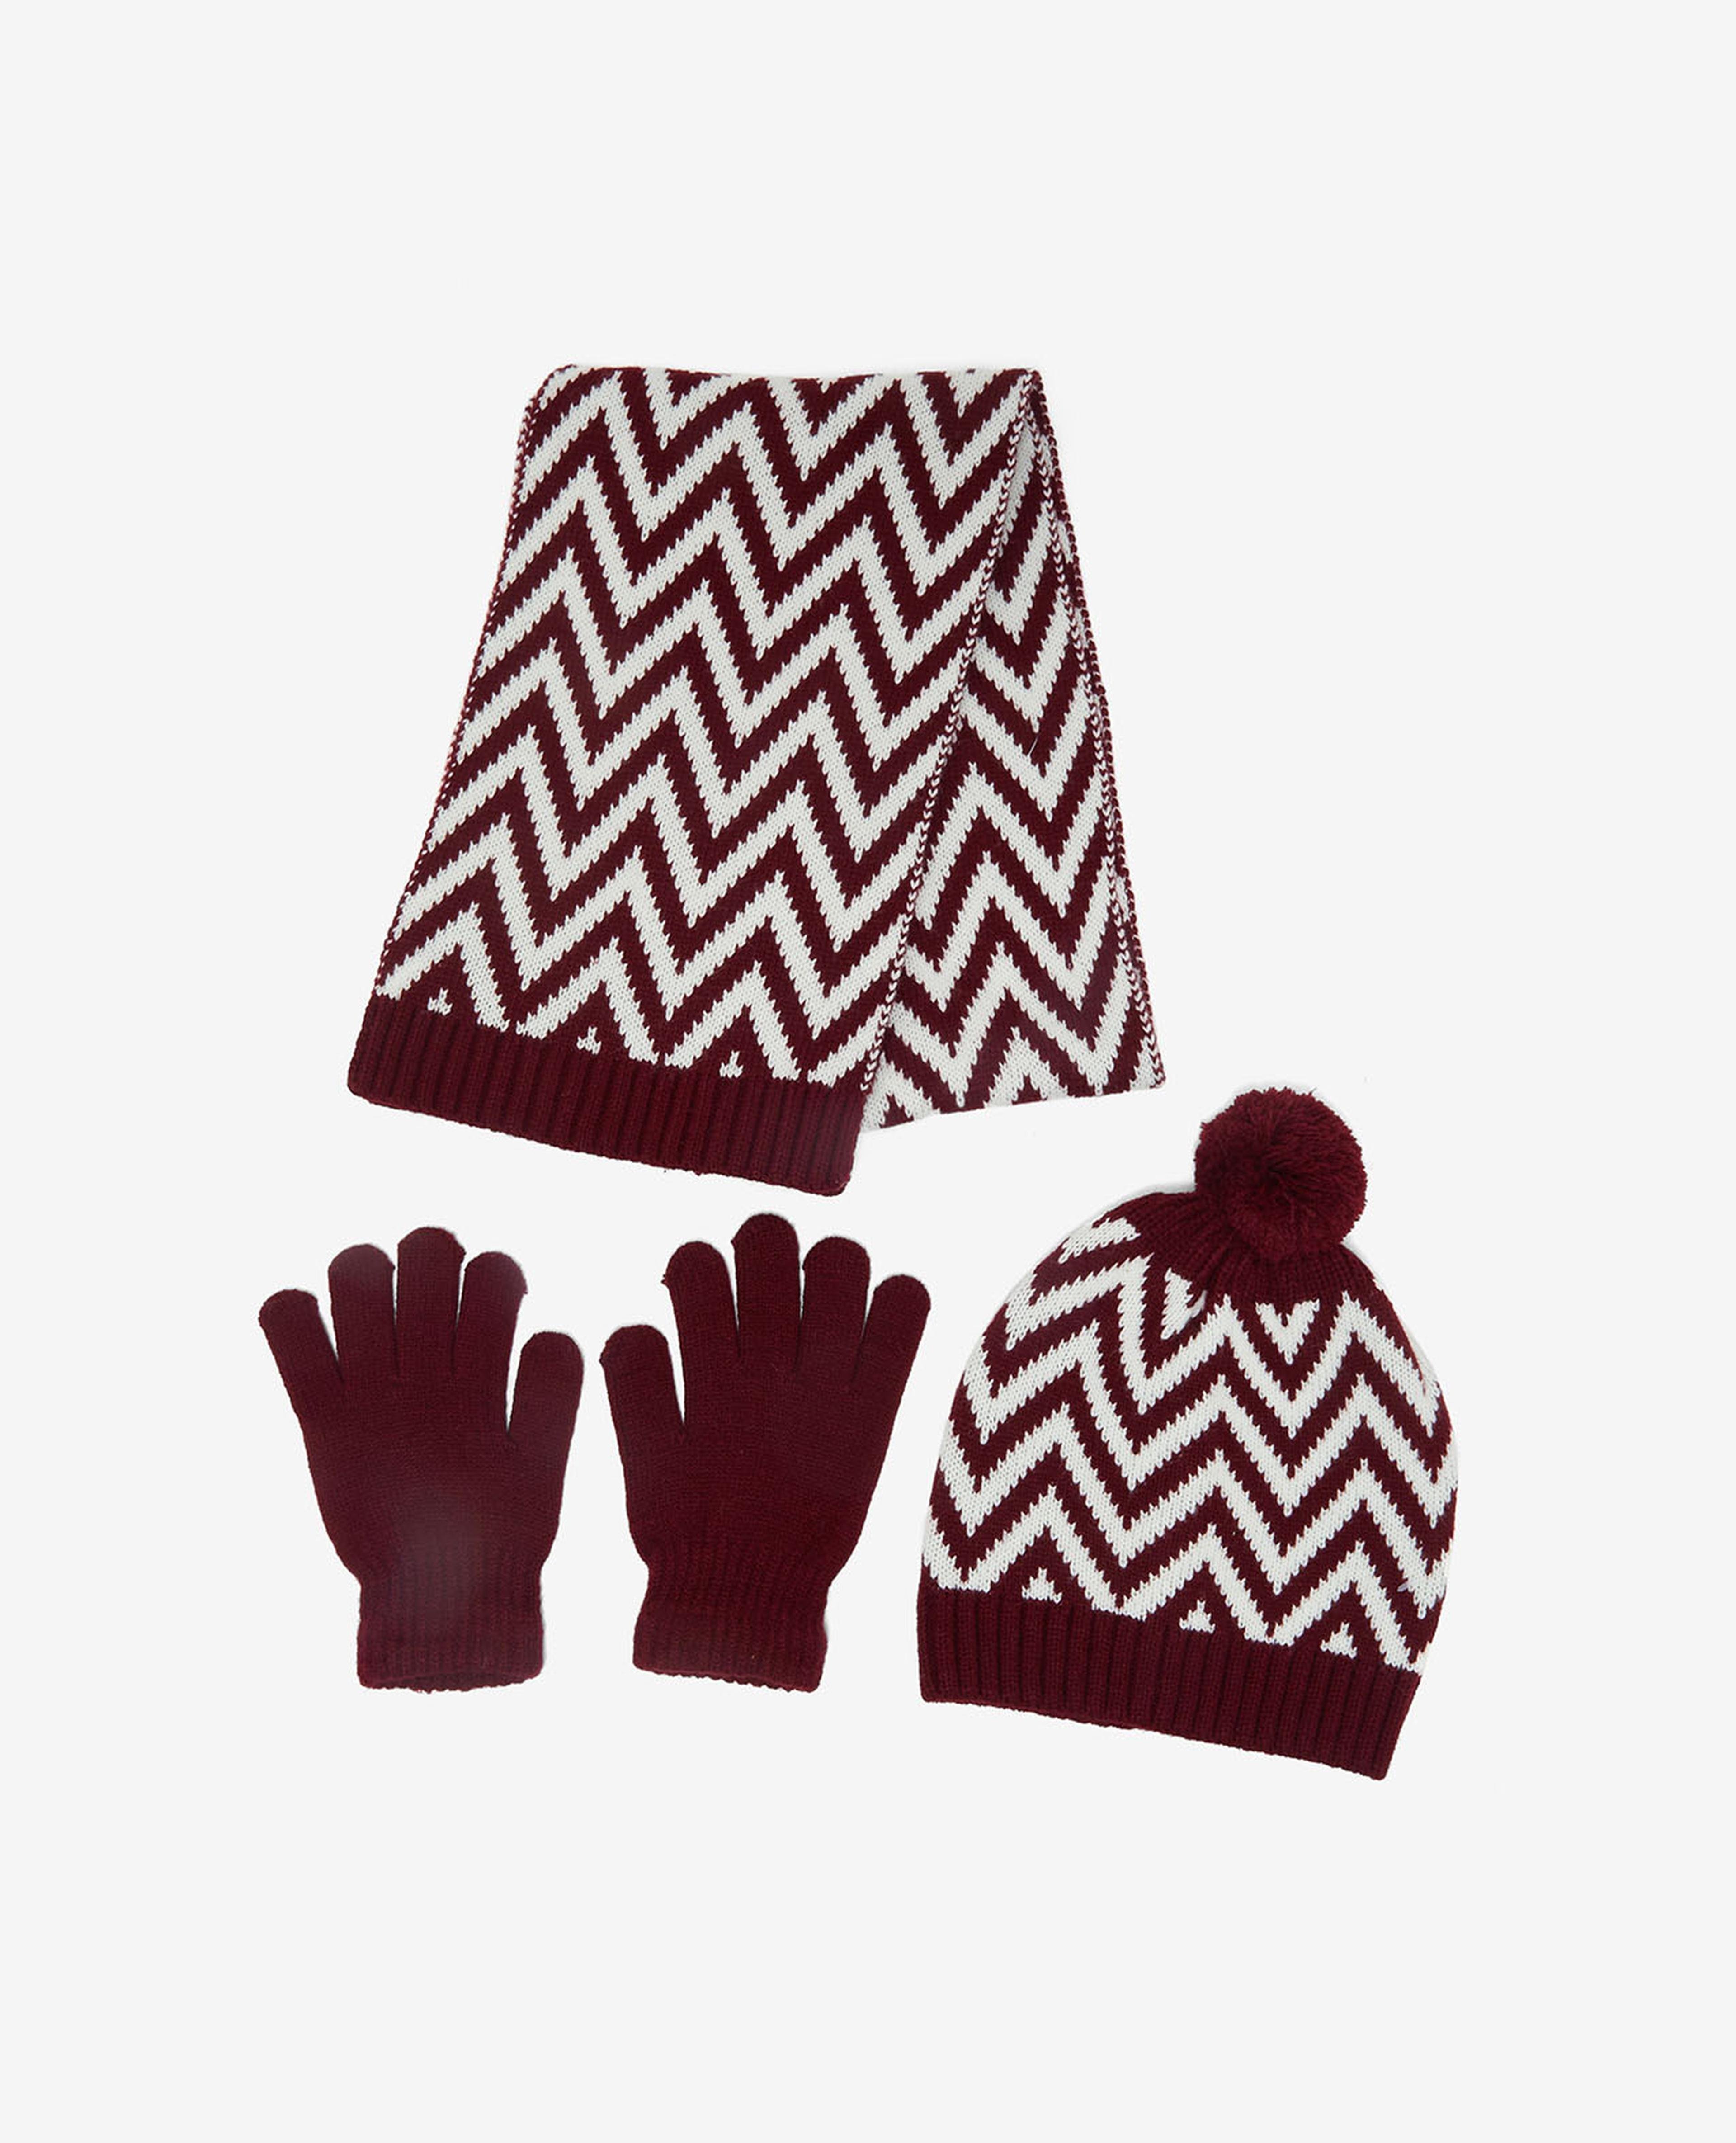 Chevron Patterned Set of Scarf, Cap and Gloves